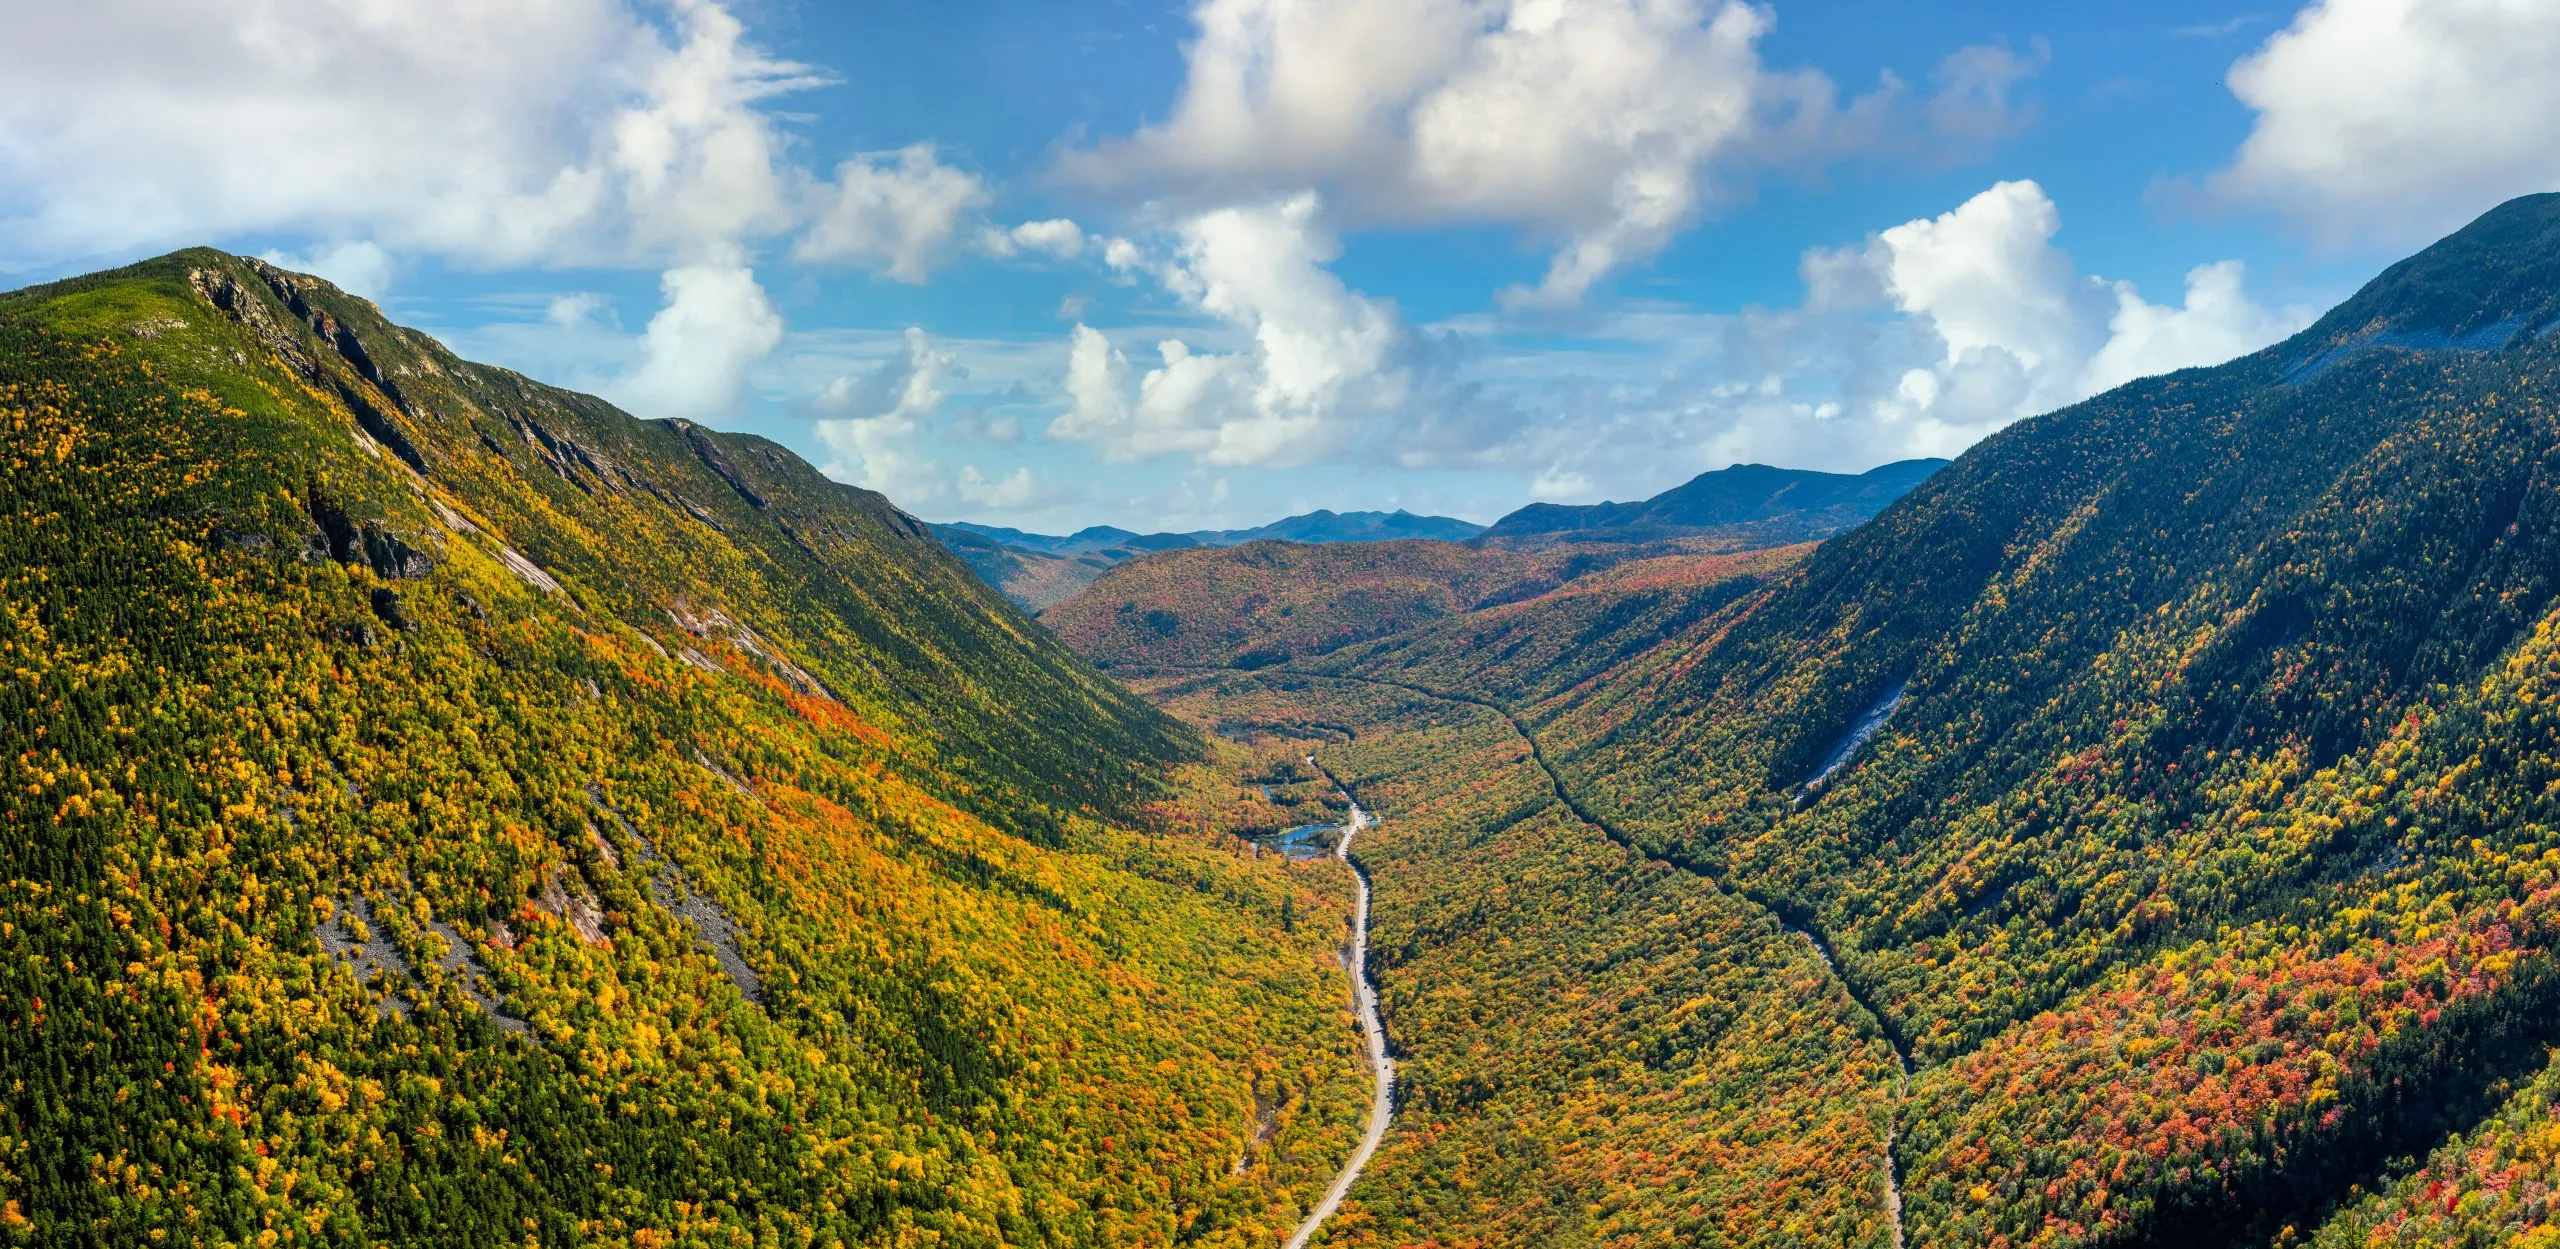 Autumn view from Mount Willard in the White Mountain National Forest - Crawford Notch Road